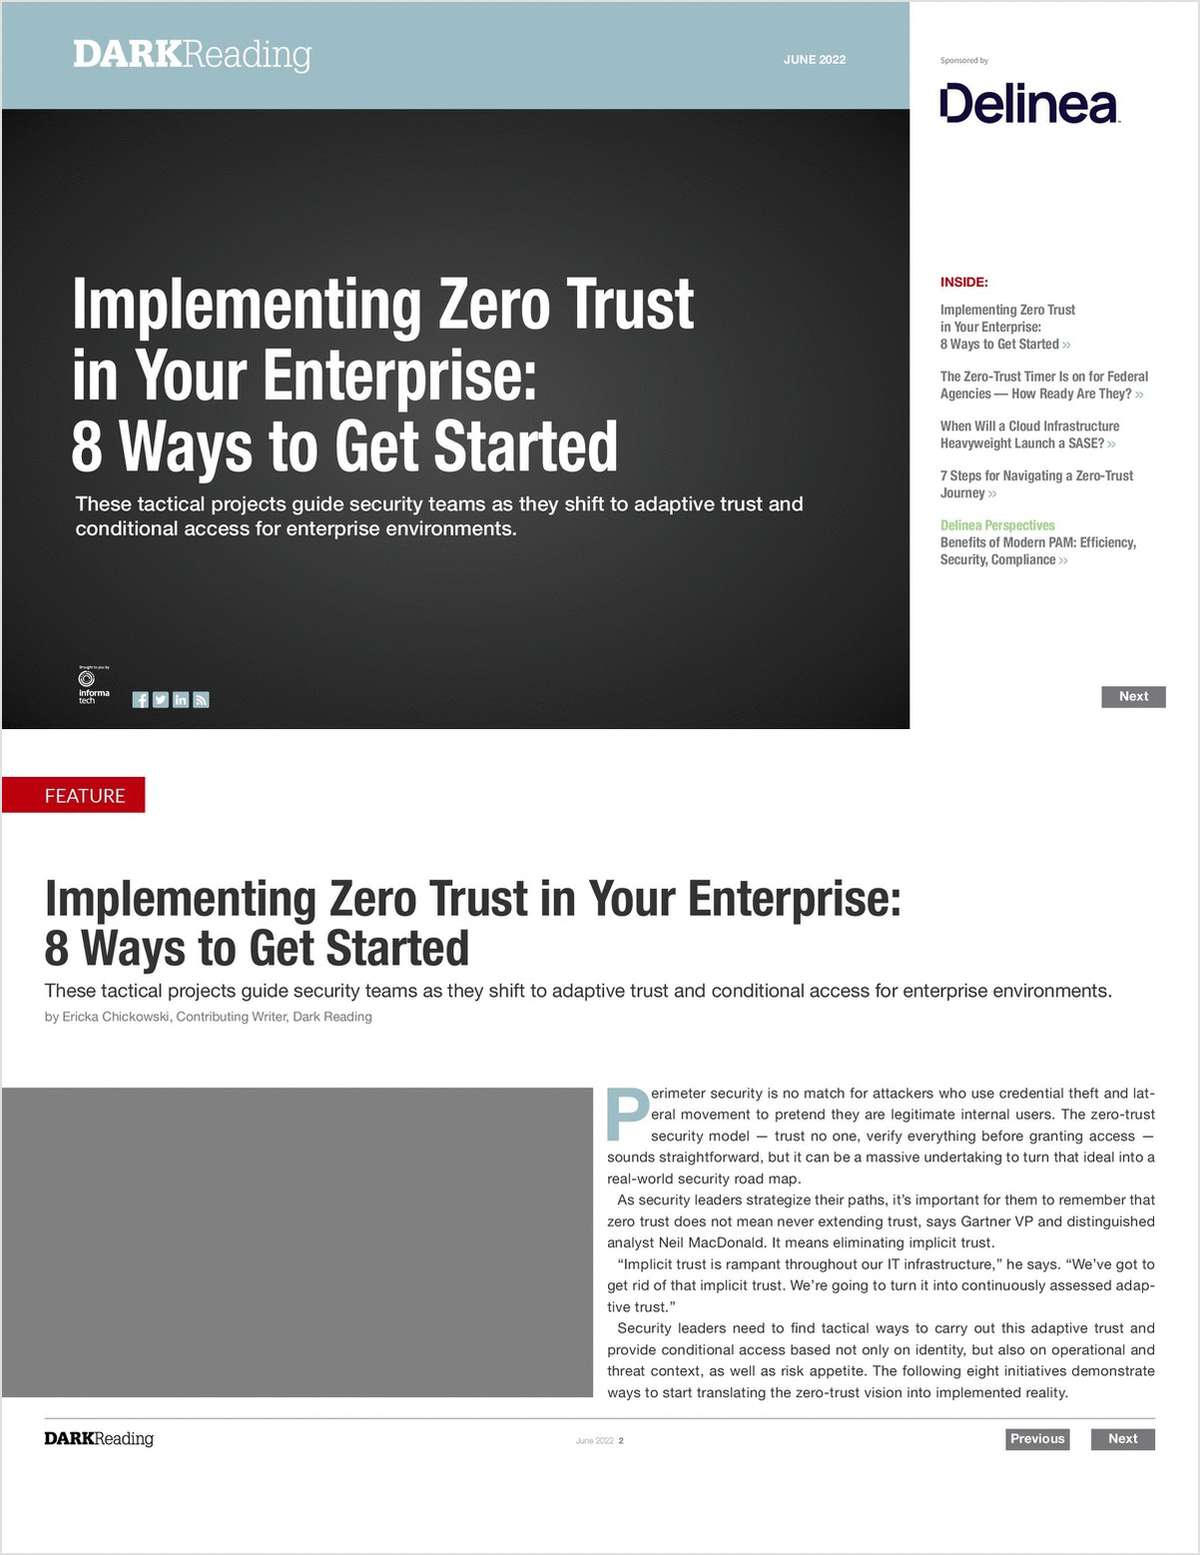 Implementing Zero Trust In Your Enterprise: How to Get Started